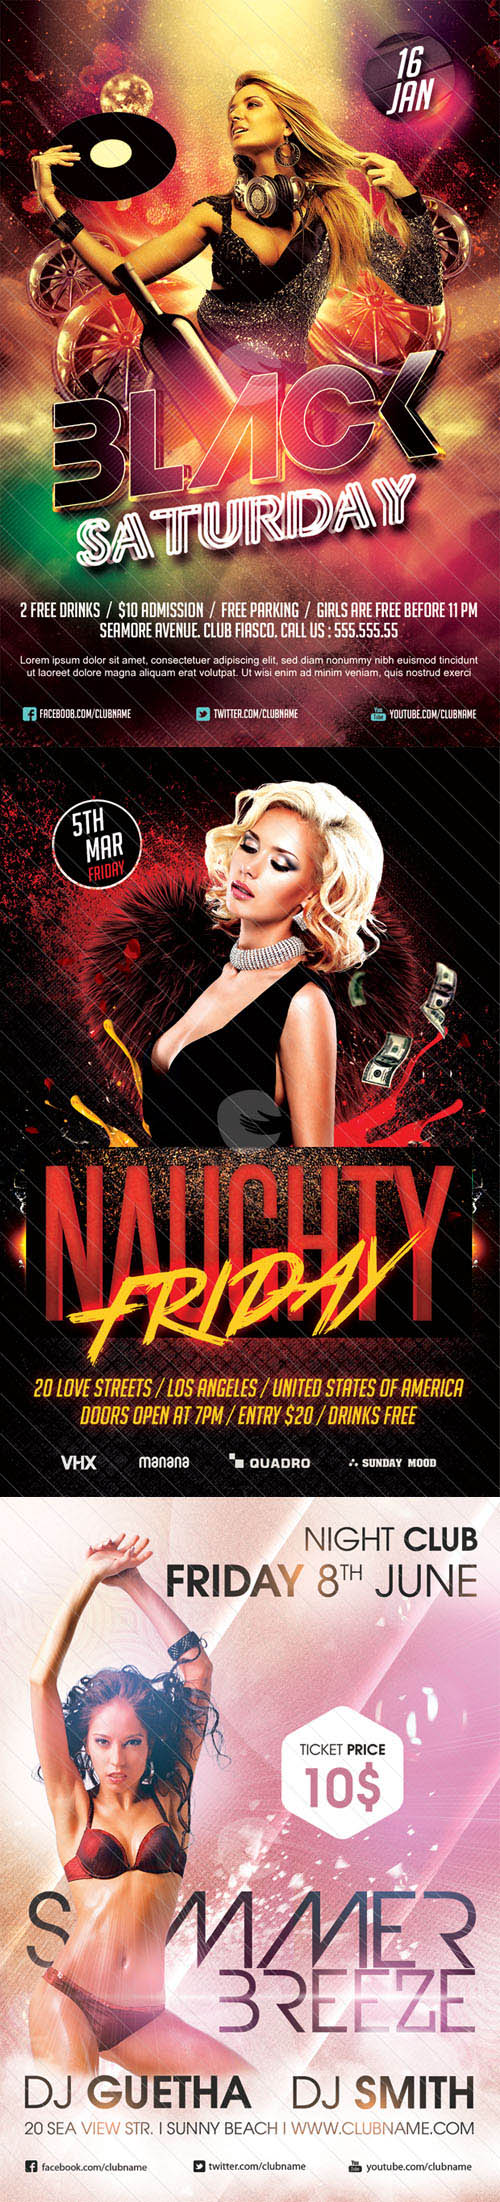 03 Night Club Party Flyer PSD Templates